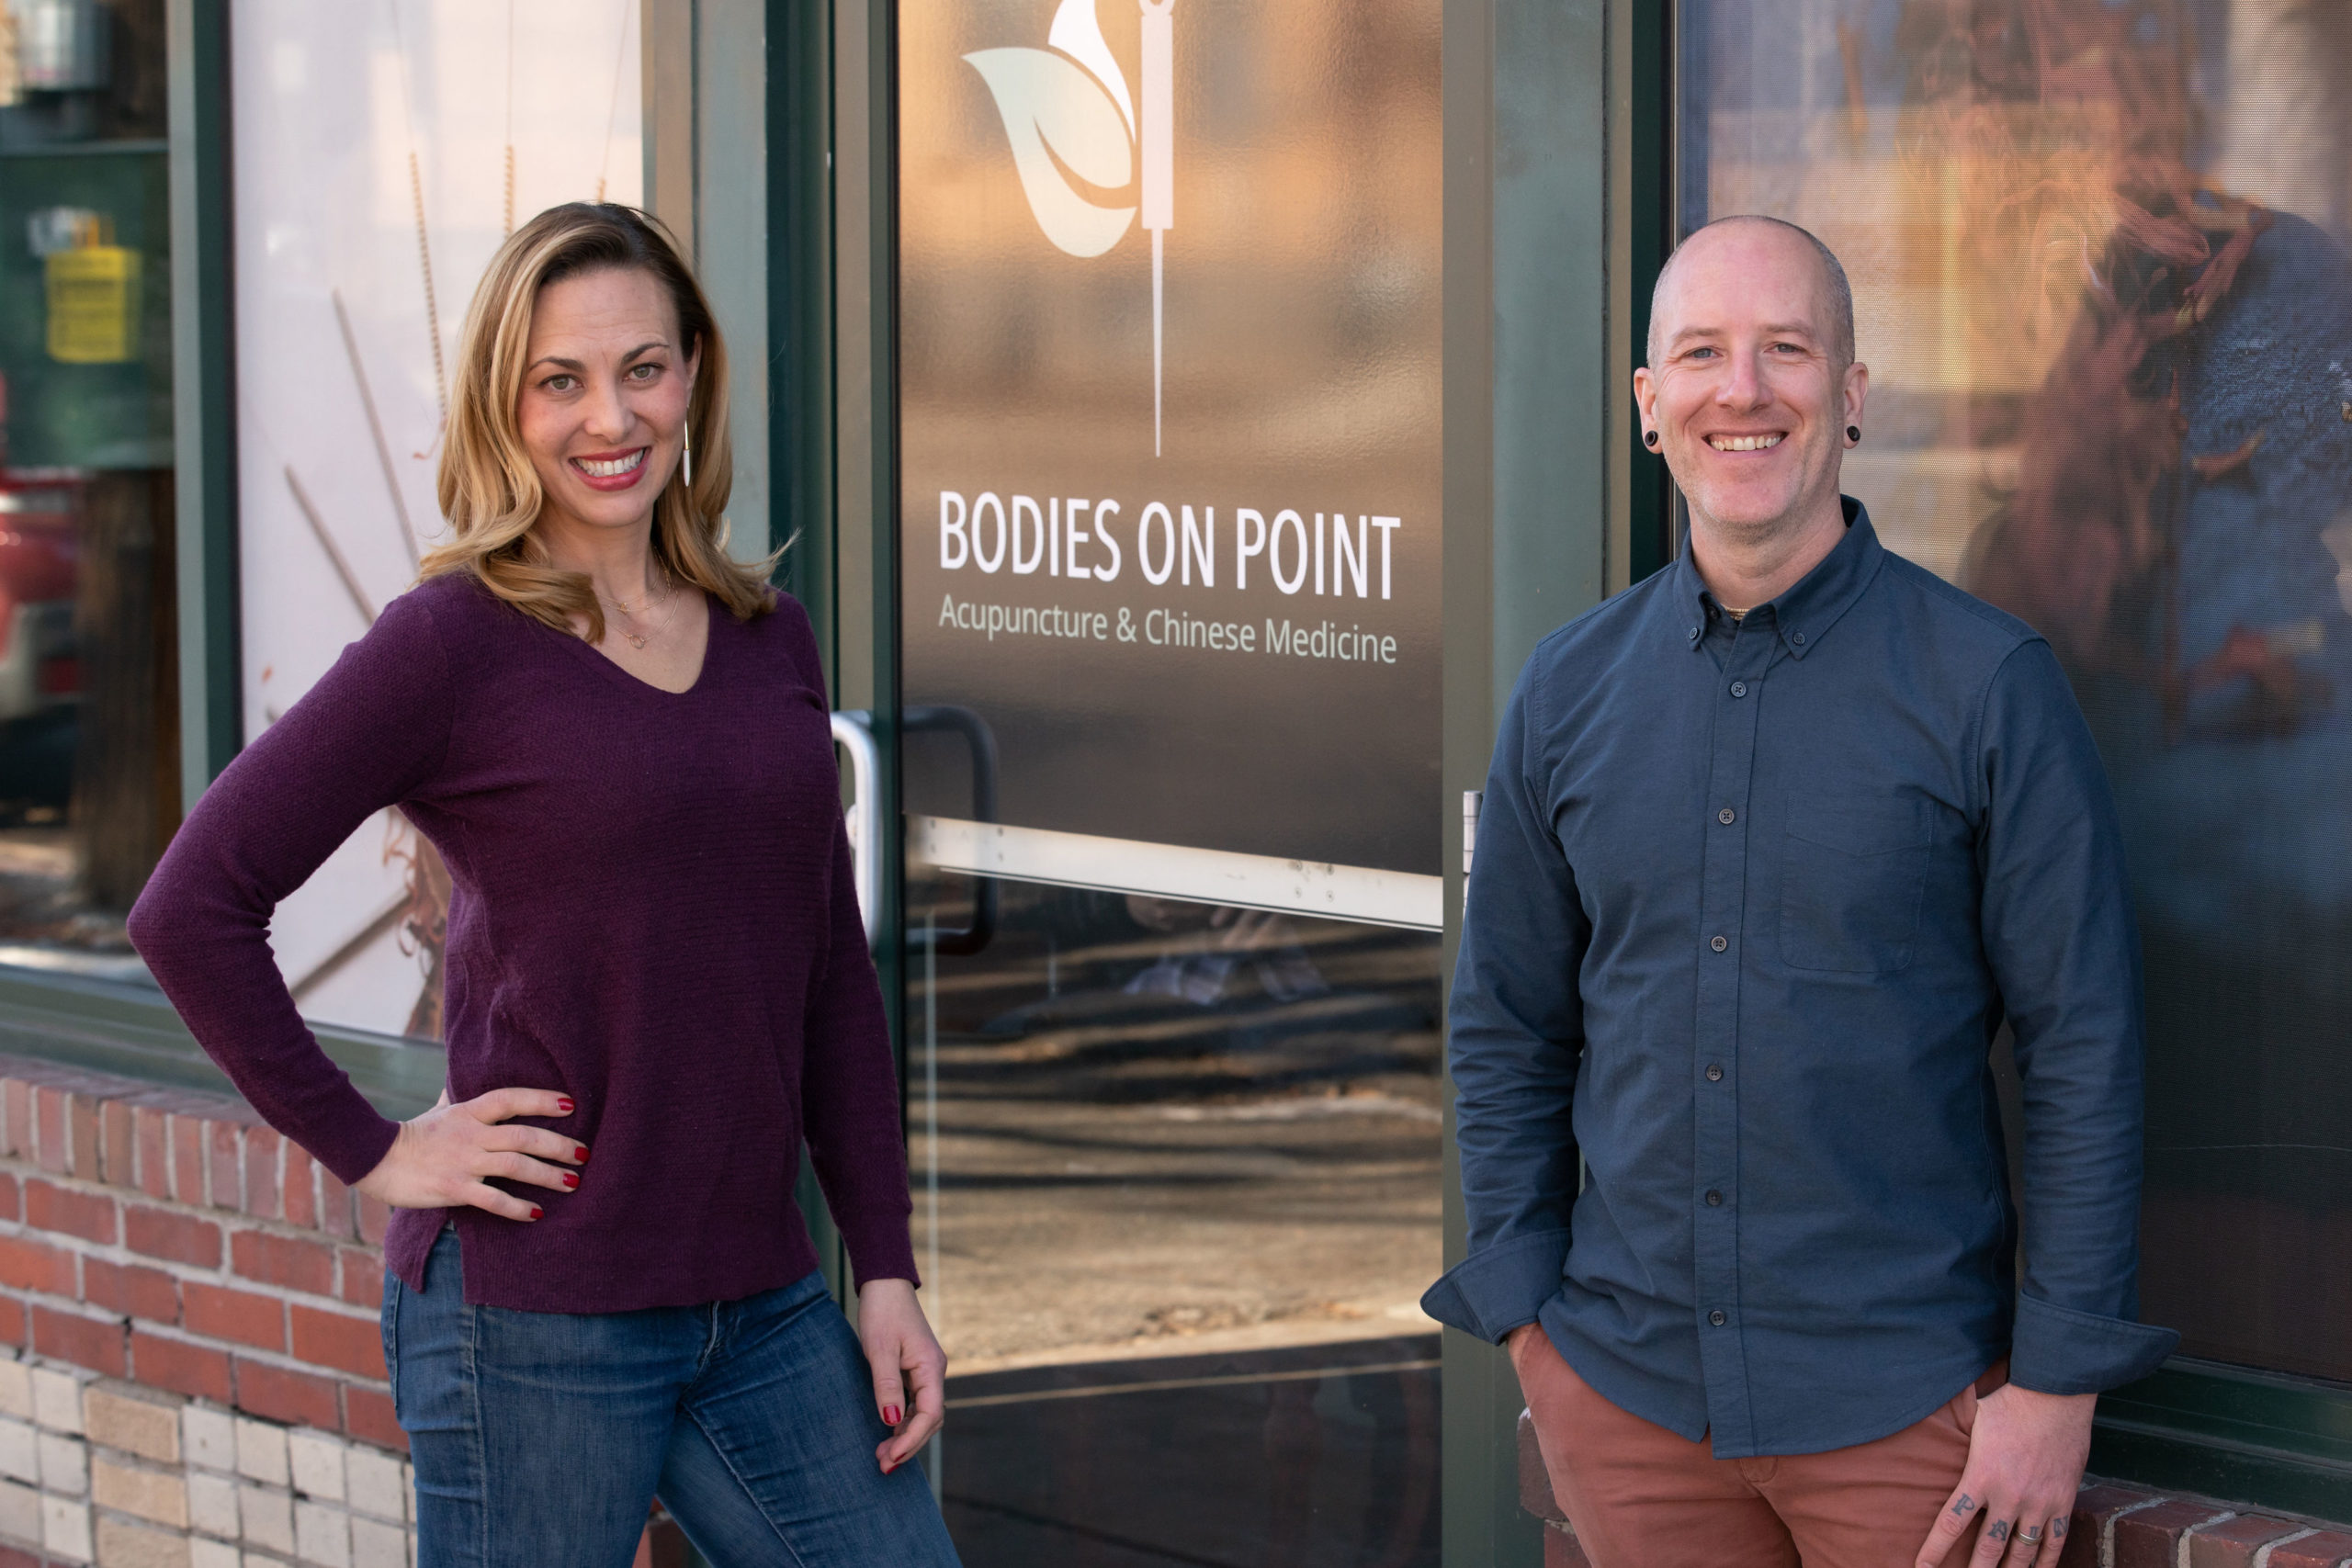 sara and thad at bodies on point in denver can help you with telemedicine during this time of COVID-19